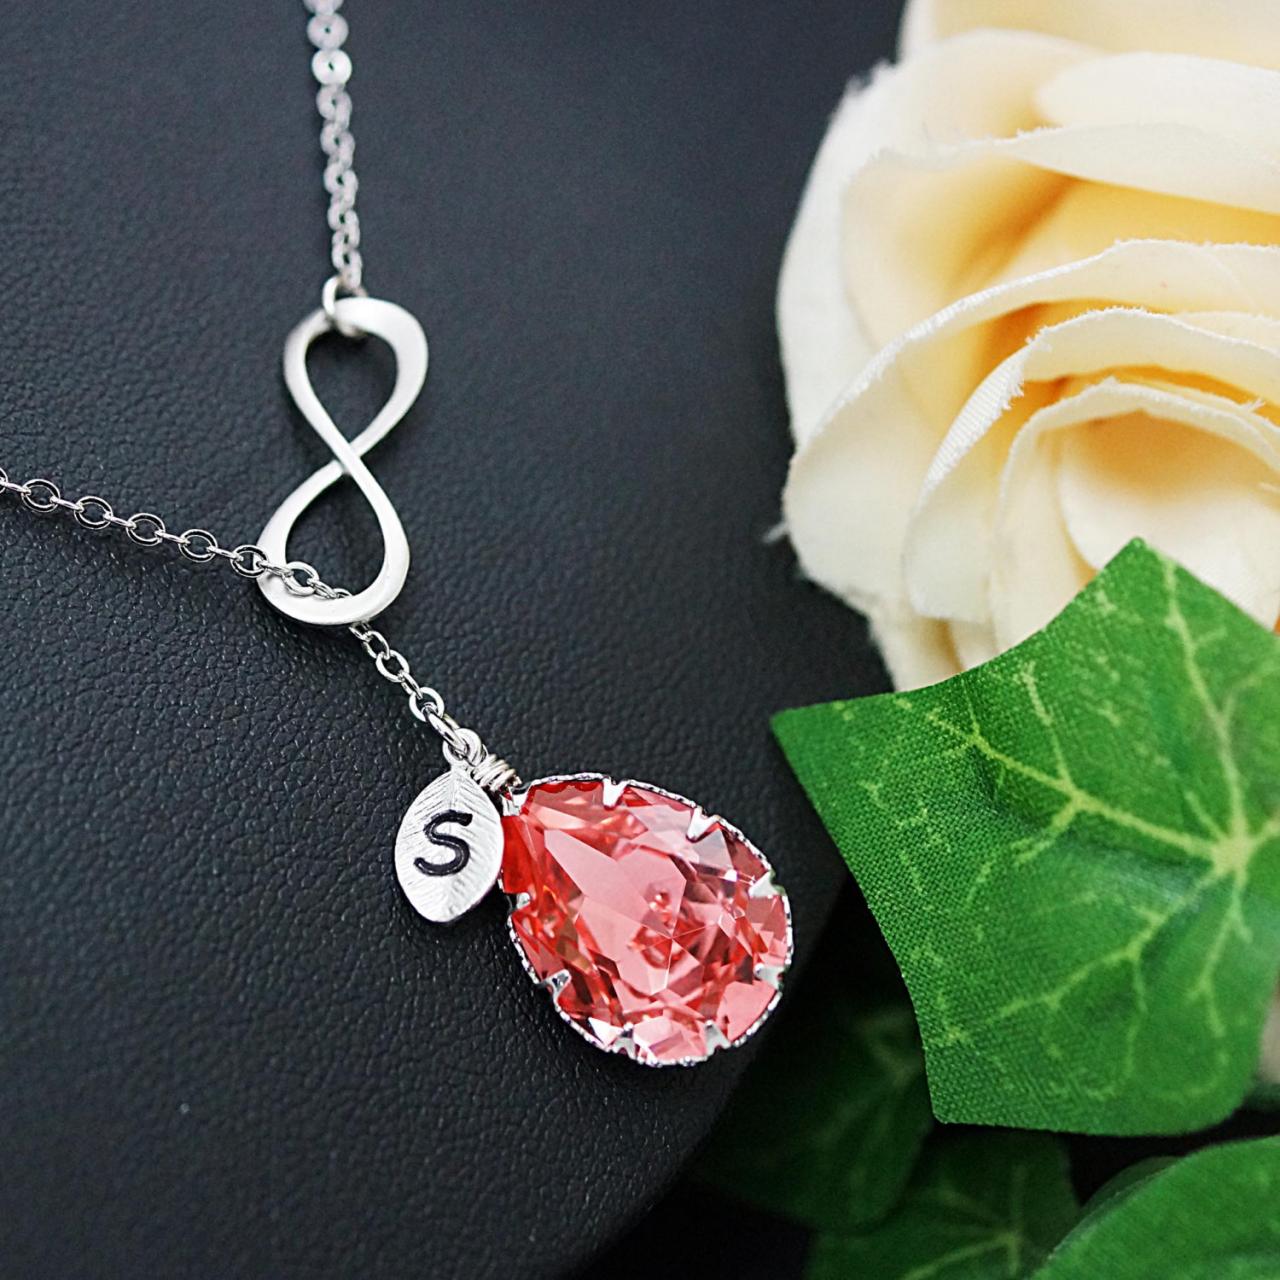 Personalized Necklace Bridesmaid Gift Wedding Infinity Charm With Swarovski Tear Drop And Initial Leaf Charm Necklace Christmas Gift For Her